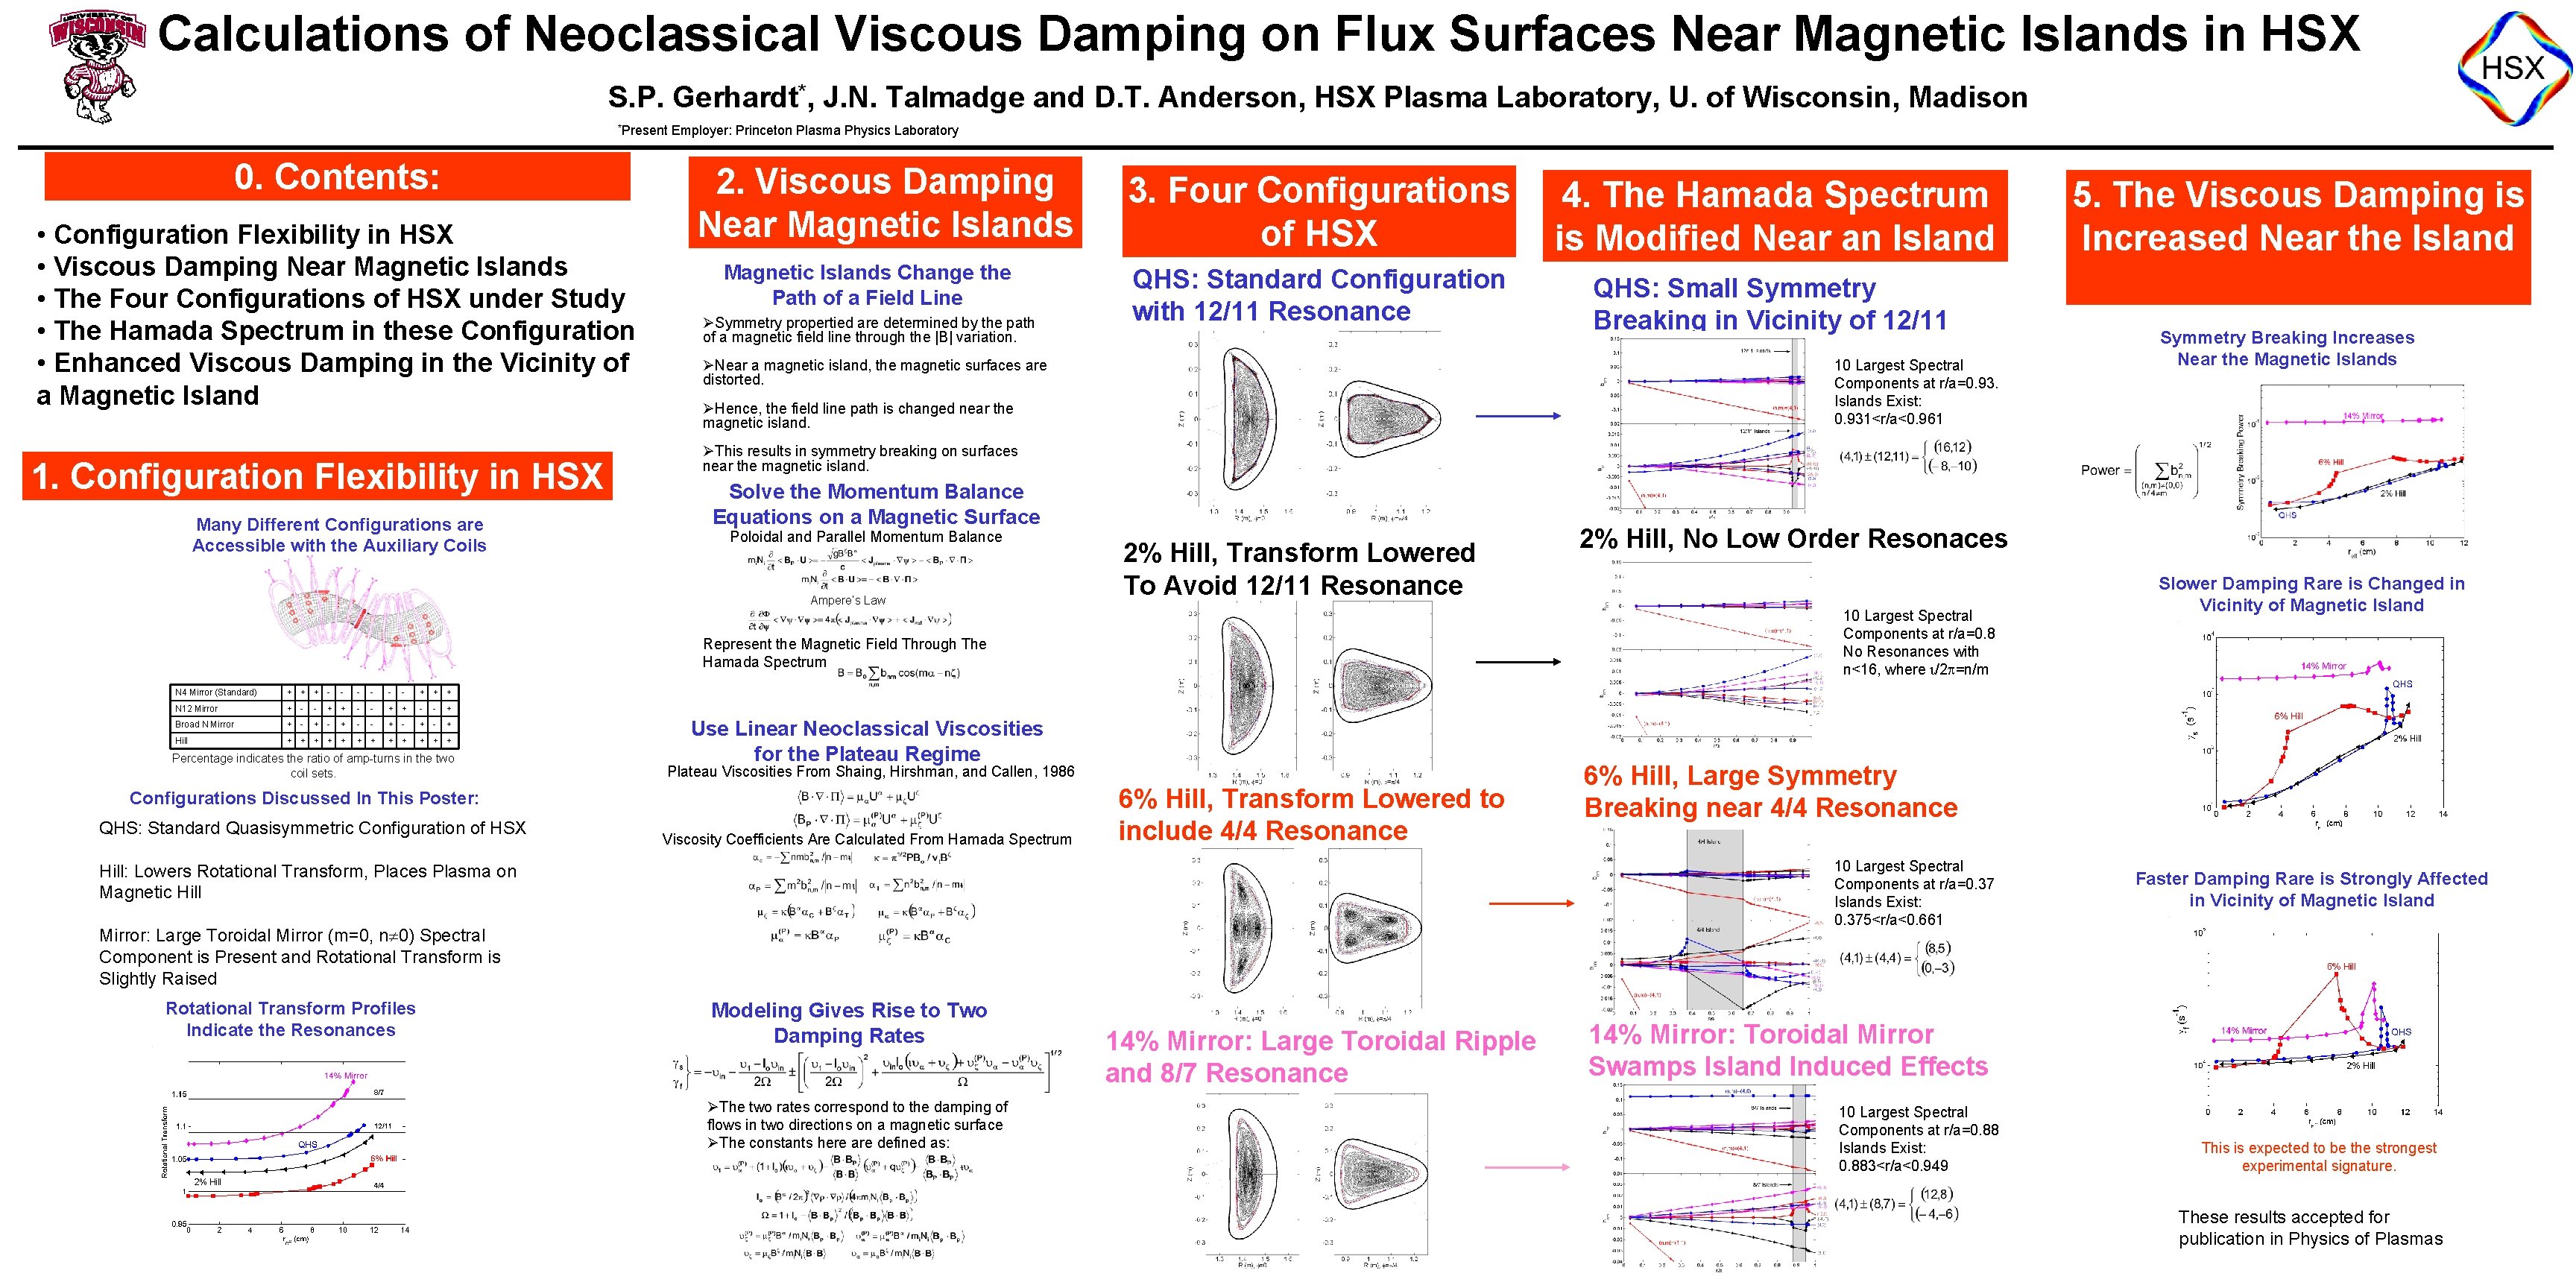 Calculations of Neoclassical Viscous Damping on Flux Surfaces Near Magnetic Islands in HSX S.